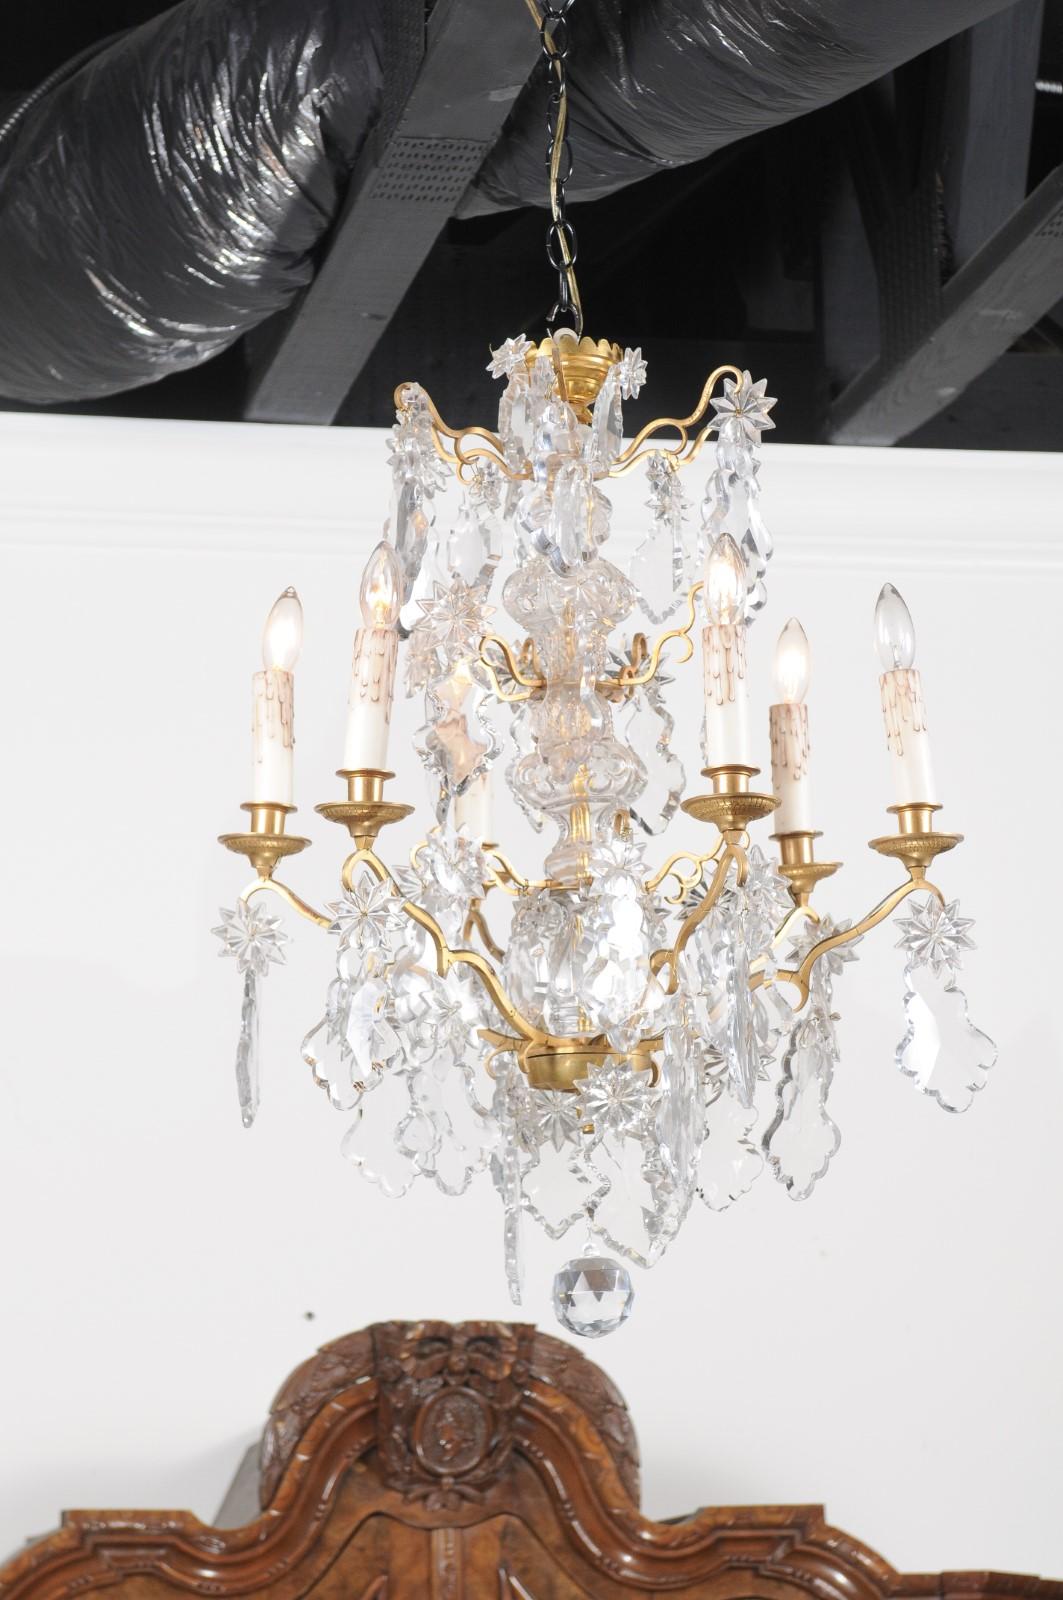 A French Napoleon III period six-light crystal chandelier from the mid-19th century, with brass armature, pendeloques and rosettes. Born in France at the beginning of Emperor Napoleon III's reign, this six-light chandelier features a central crystal